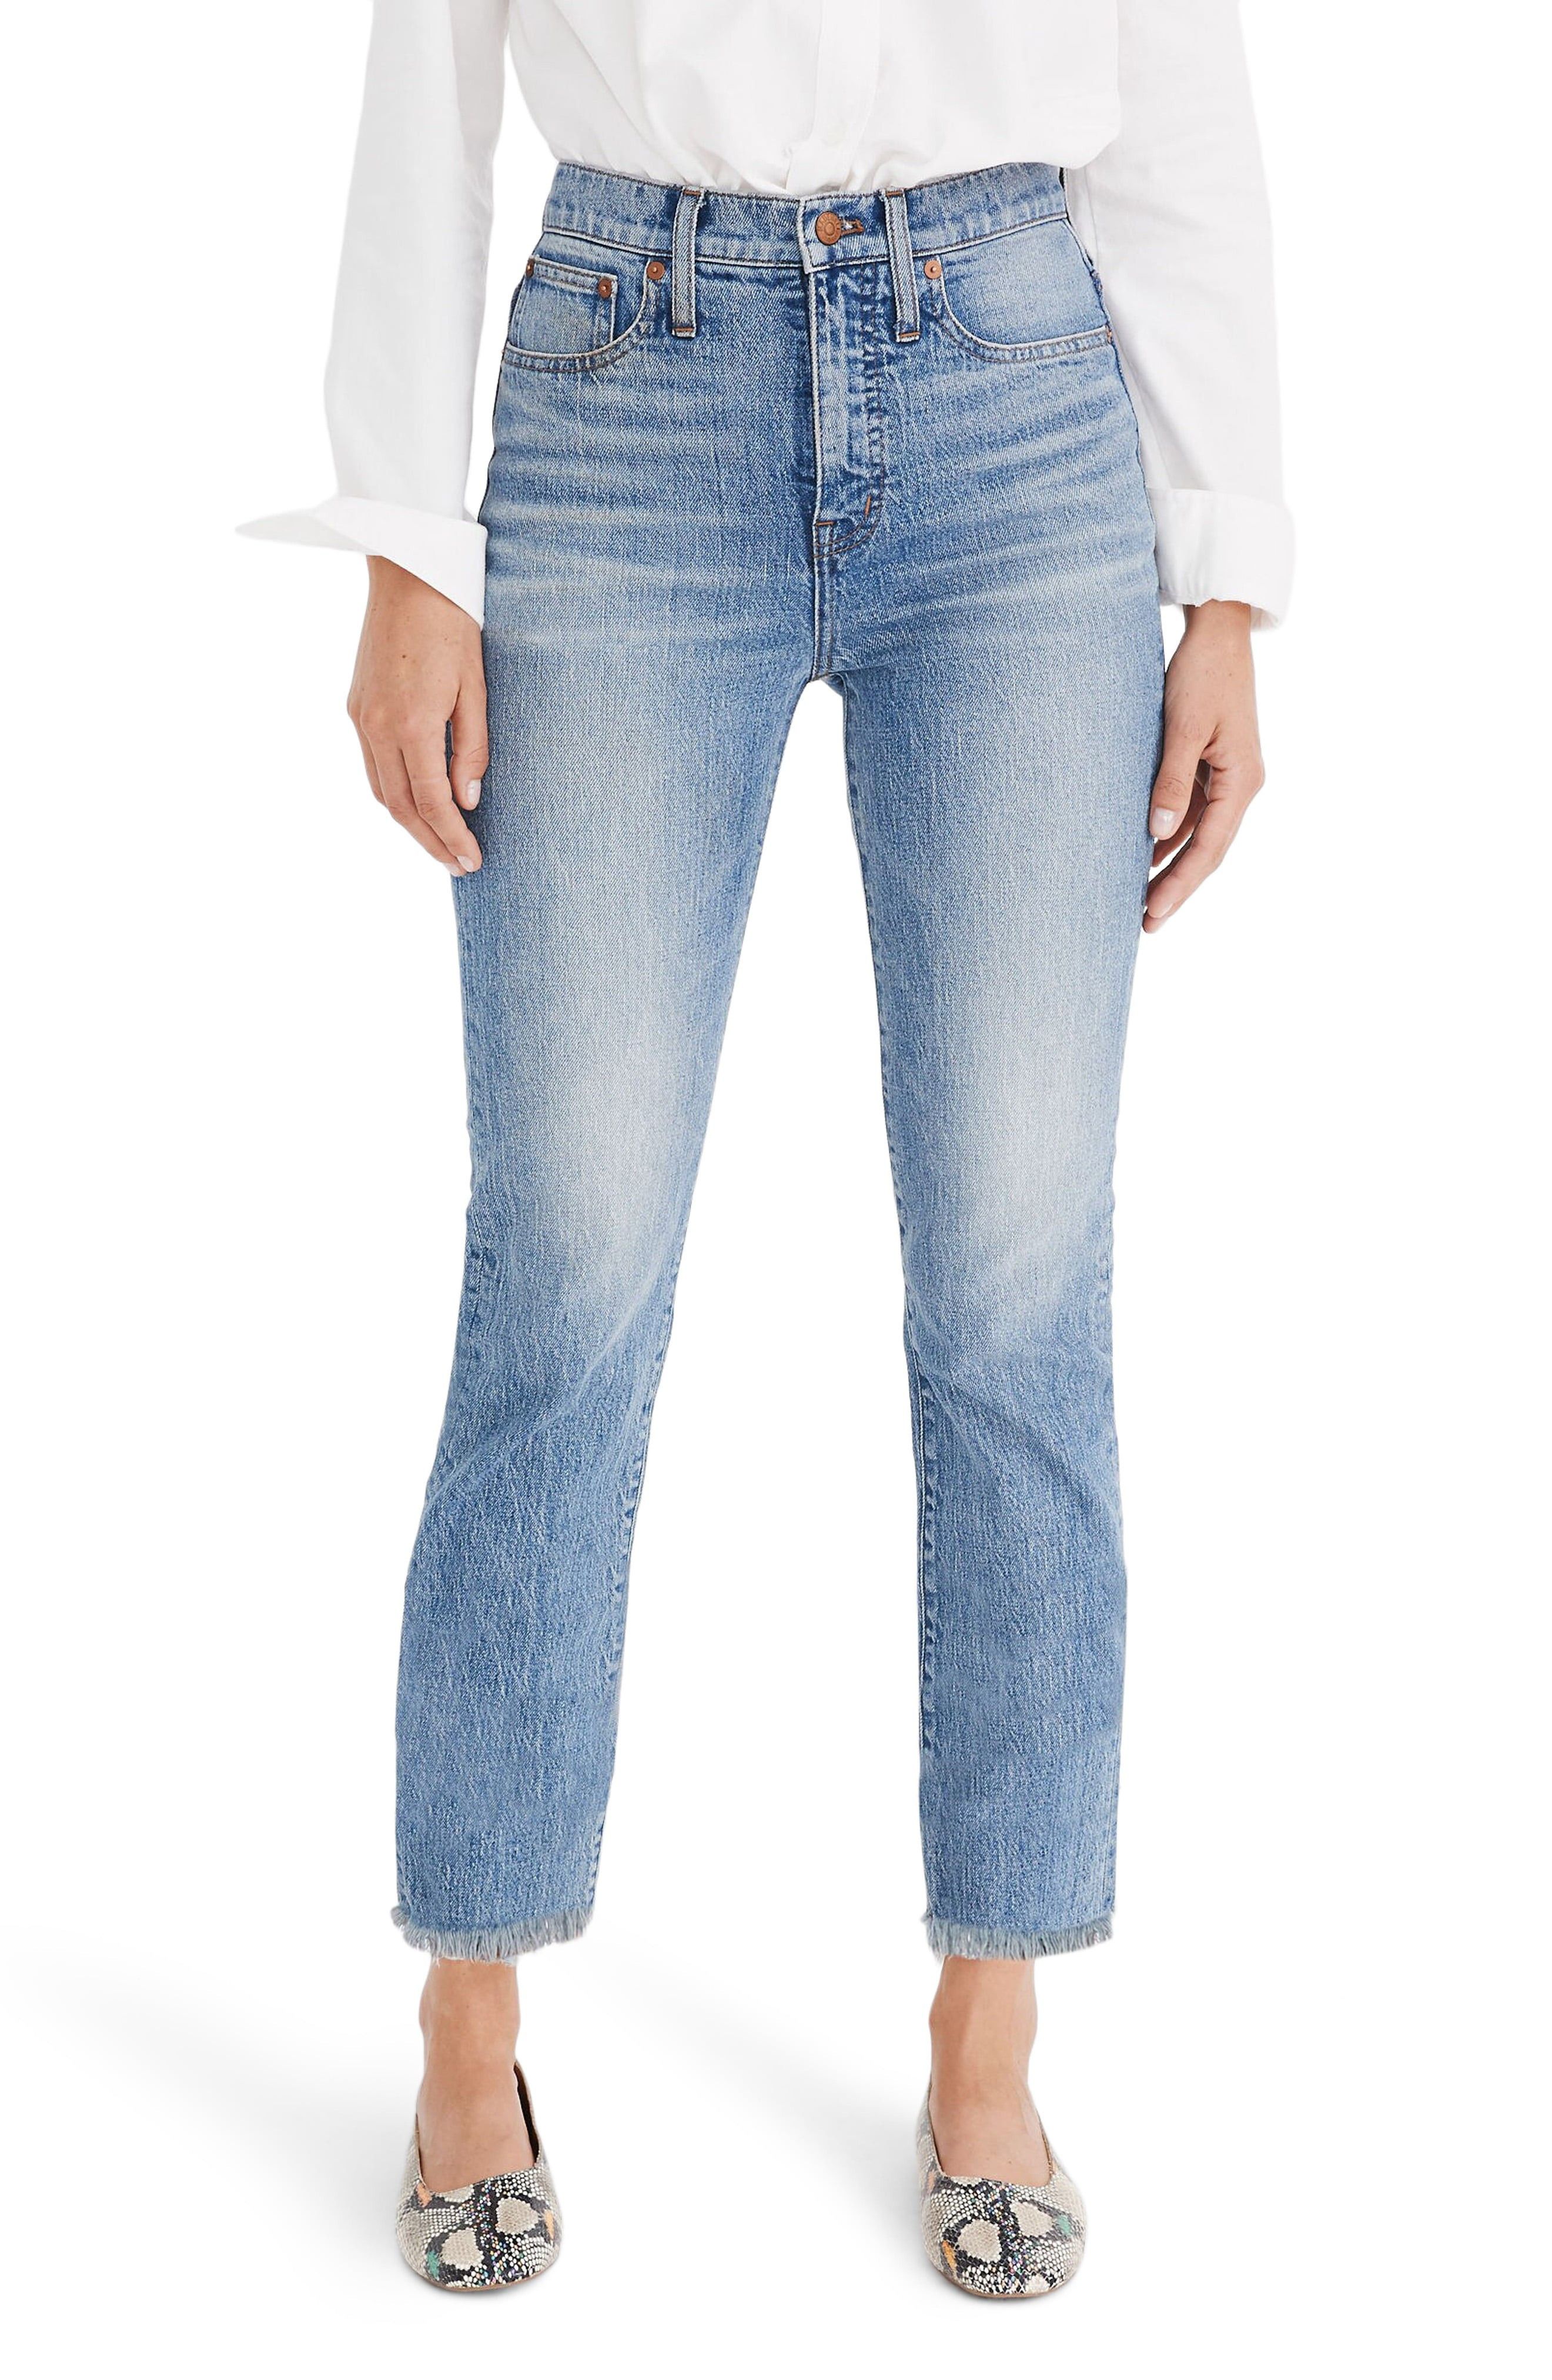 Madewell The Perfect Vintage Jean in Ainsworth at Nordstrom, Size 30 | Nordstrom